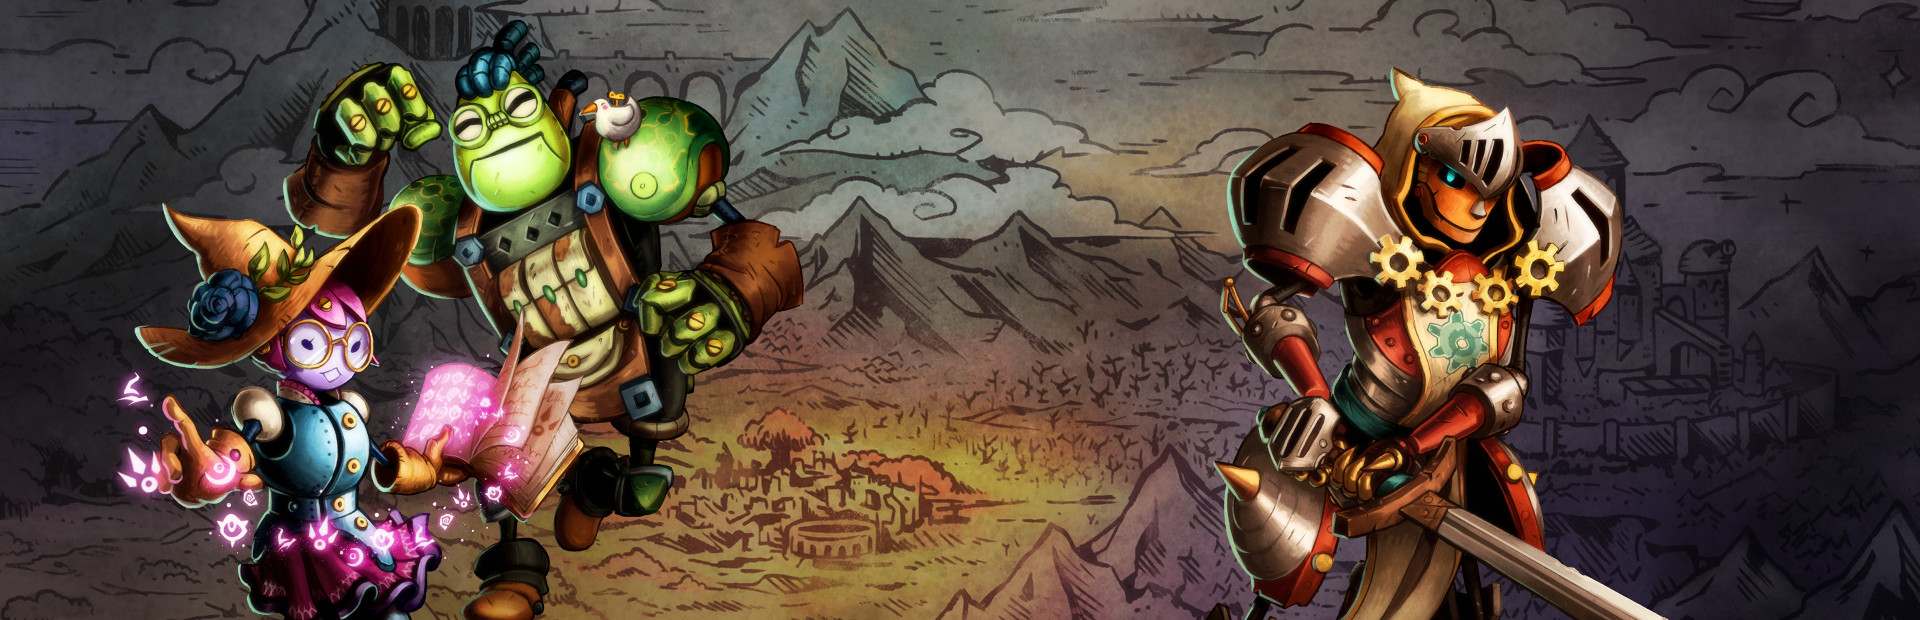 SteamWorld Quest: Hand of Gilgamech cover image